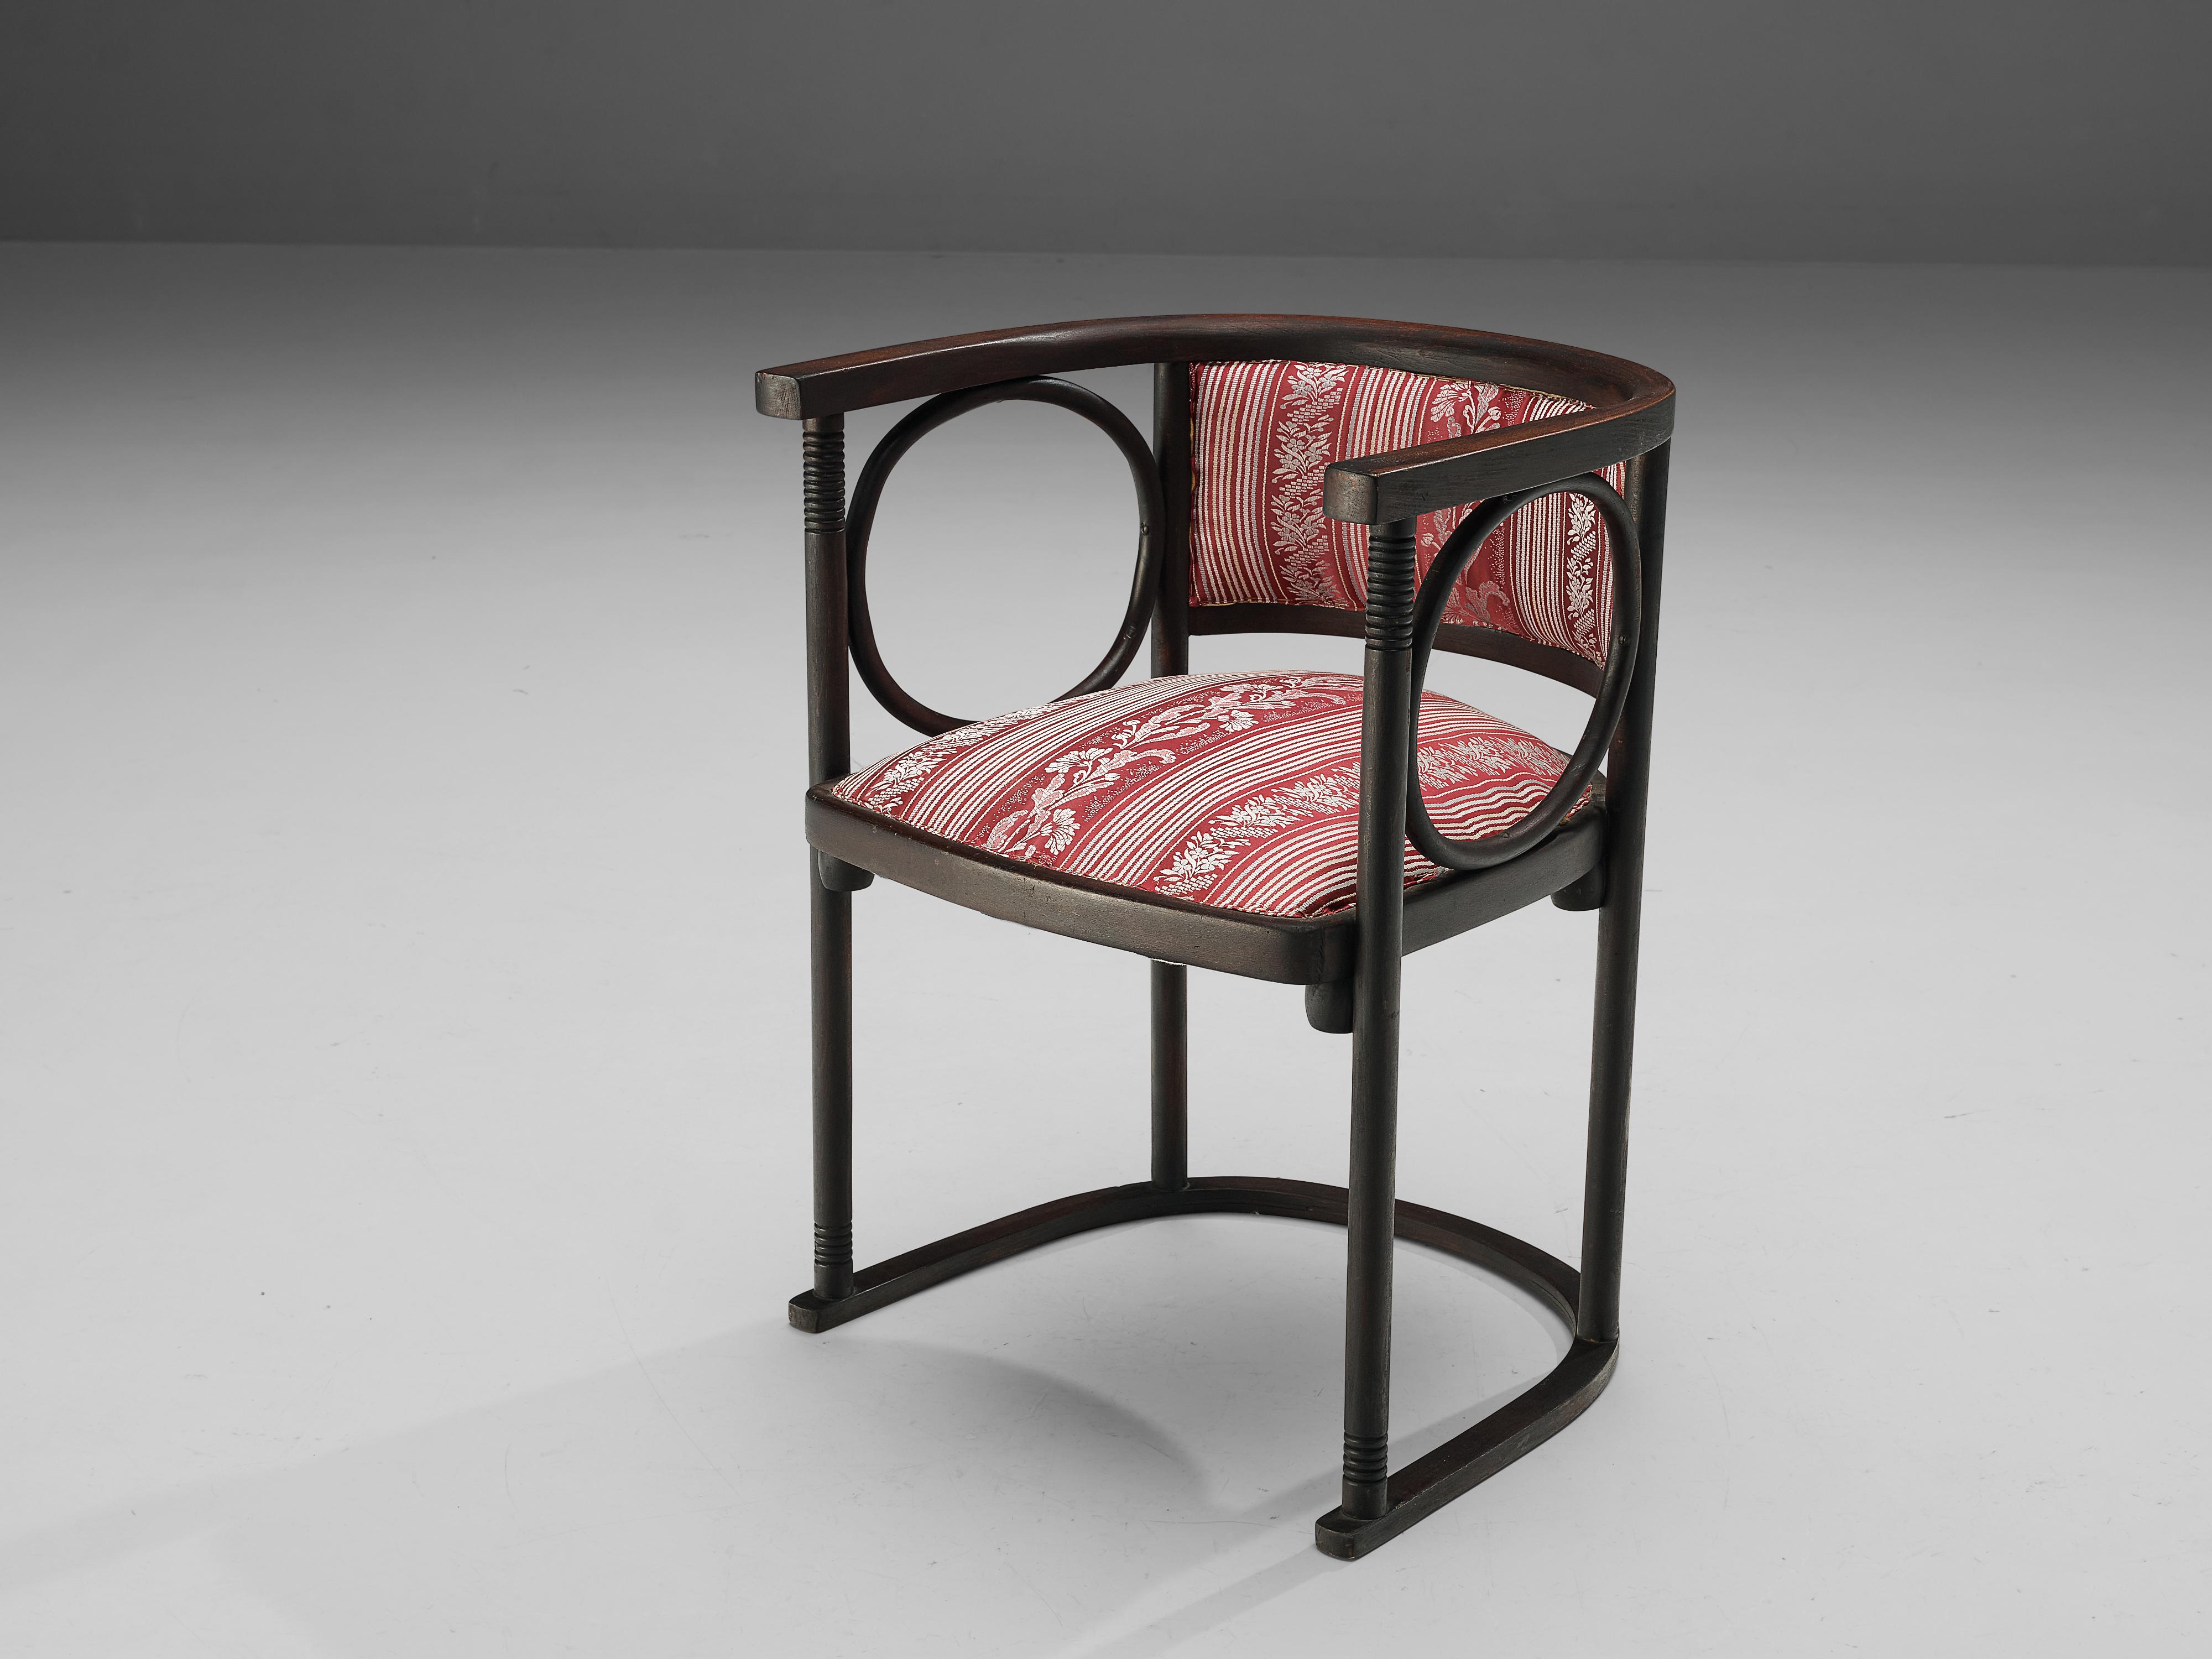 Josef Hoffmann, armchair, Austria, design 1930s 

This beautifully shaped bentwood armchair designed by Josef Hoffmann (1870-1956) is characterized by a sculptural construction, featuring clear lines and round edges. Hoffman is an expert in